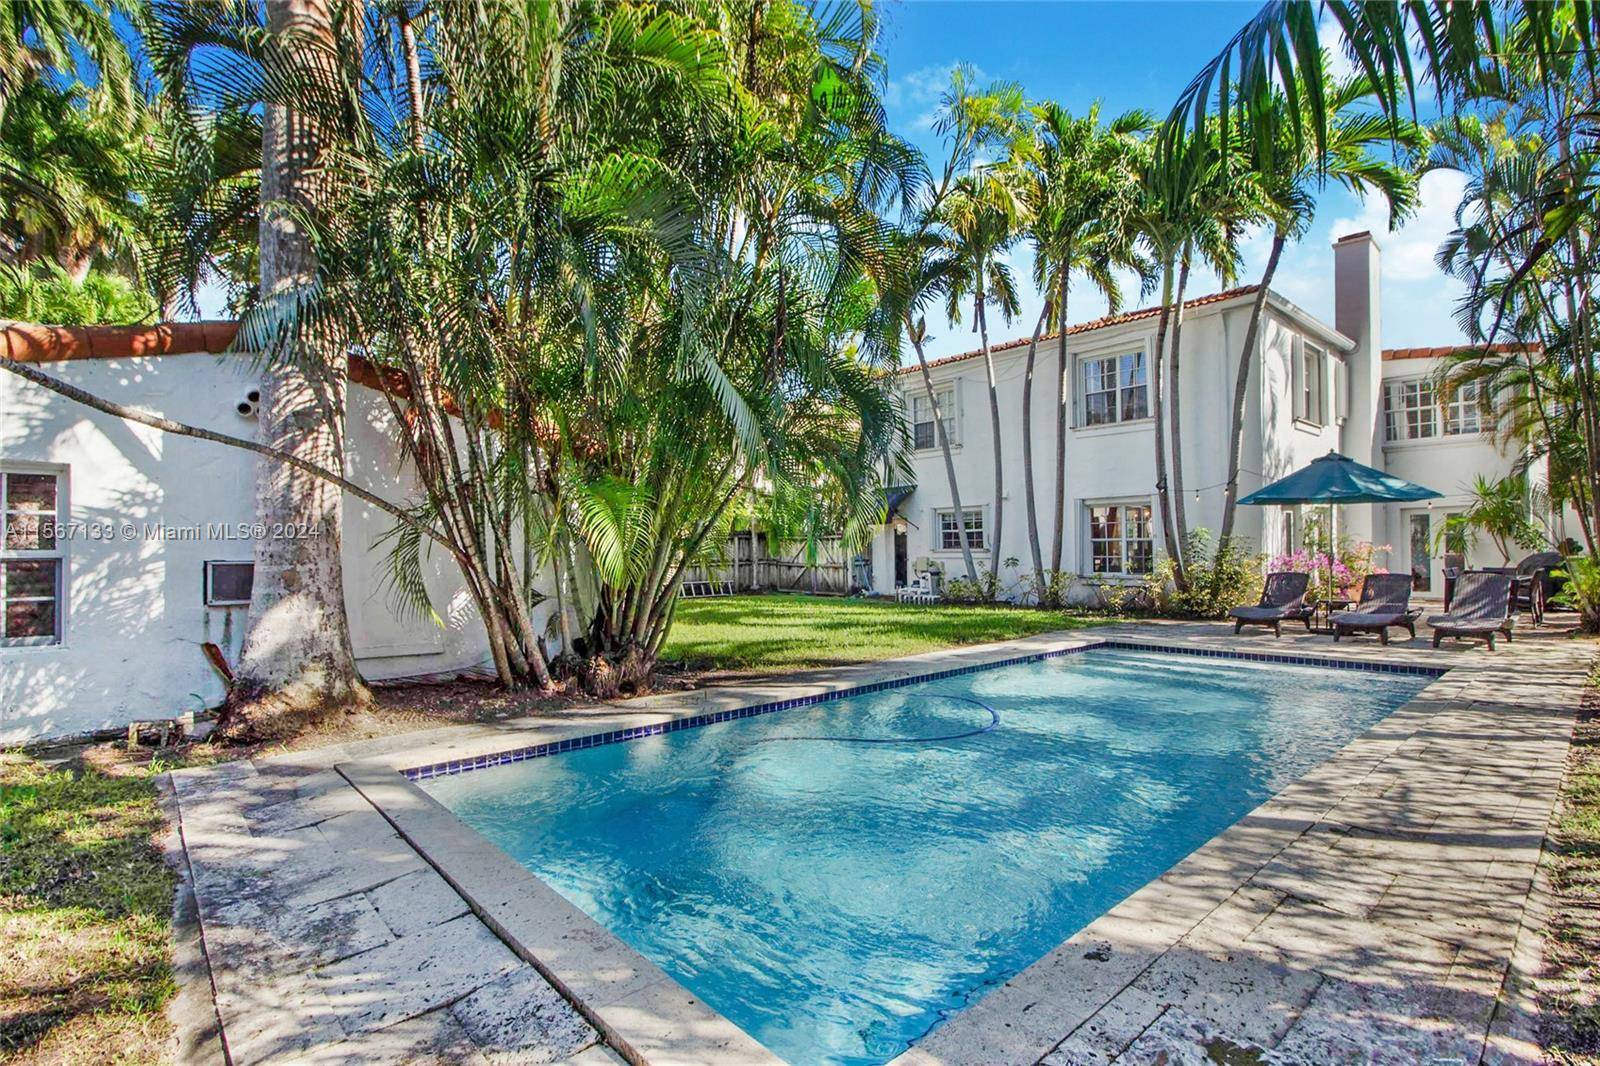 Two story Florida Mediterranean bursting with classic charm and gracious living located directly across from prestigious La Gorce Country Club in one of the most sought after areas of Miami ...